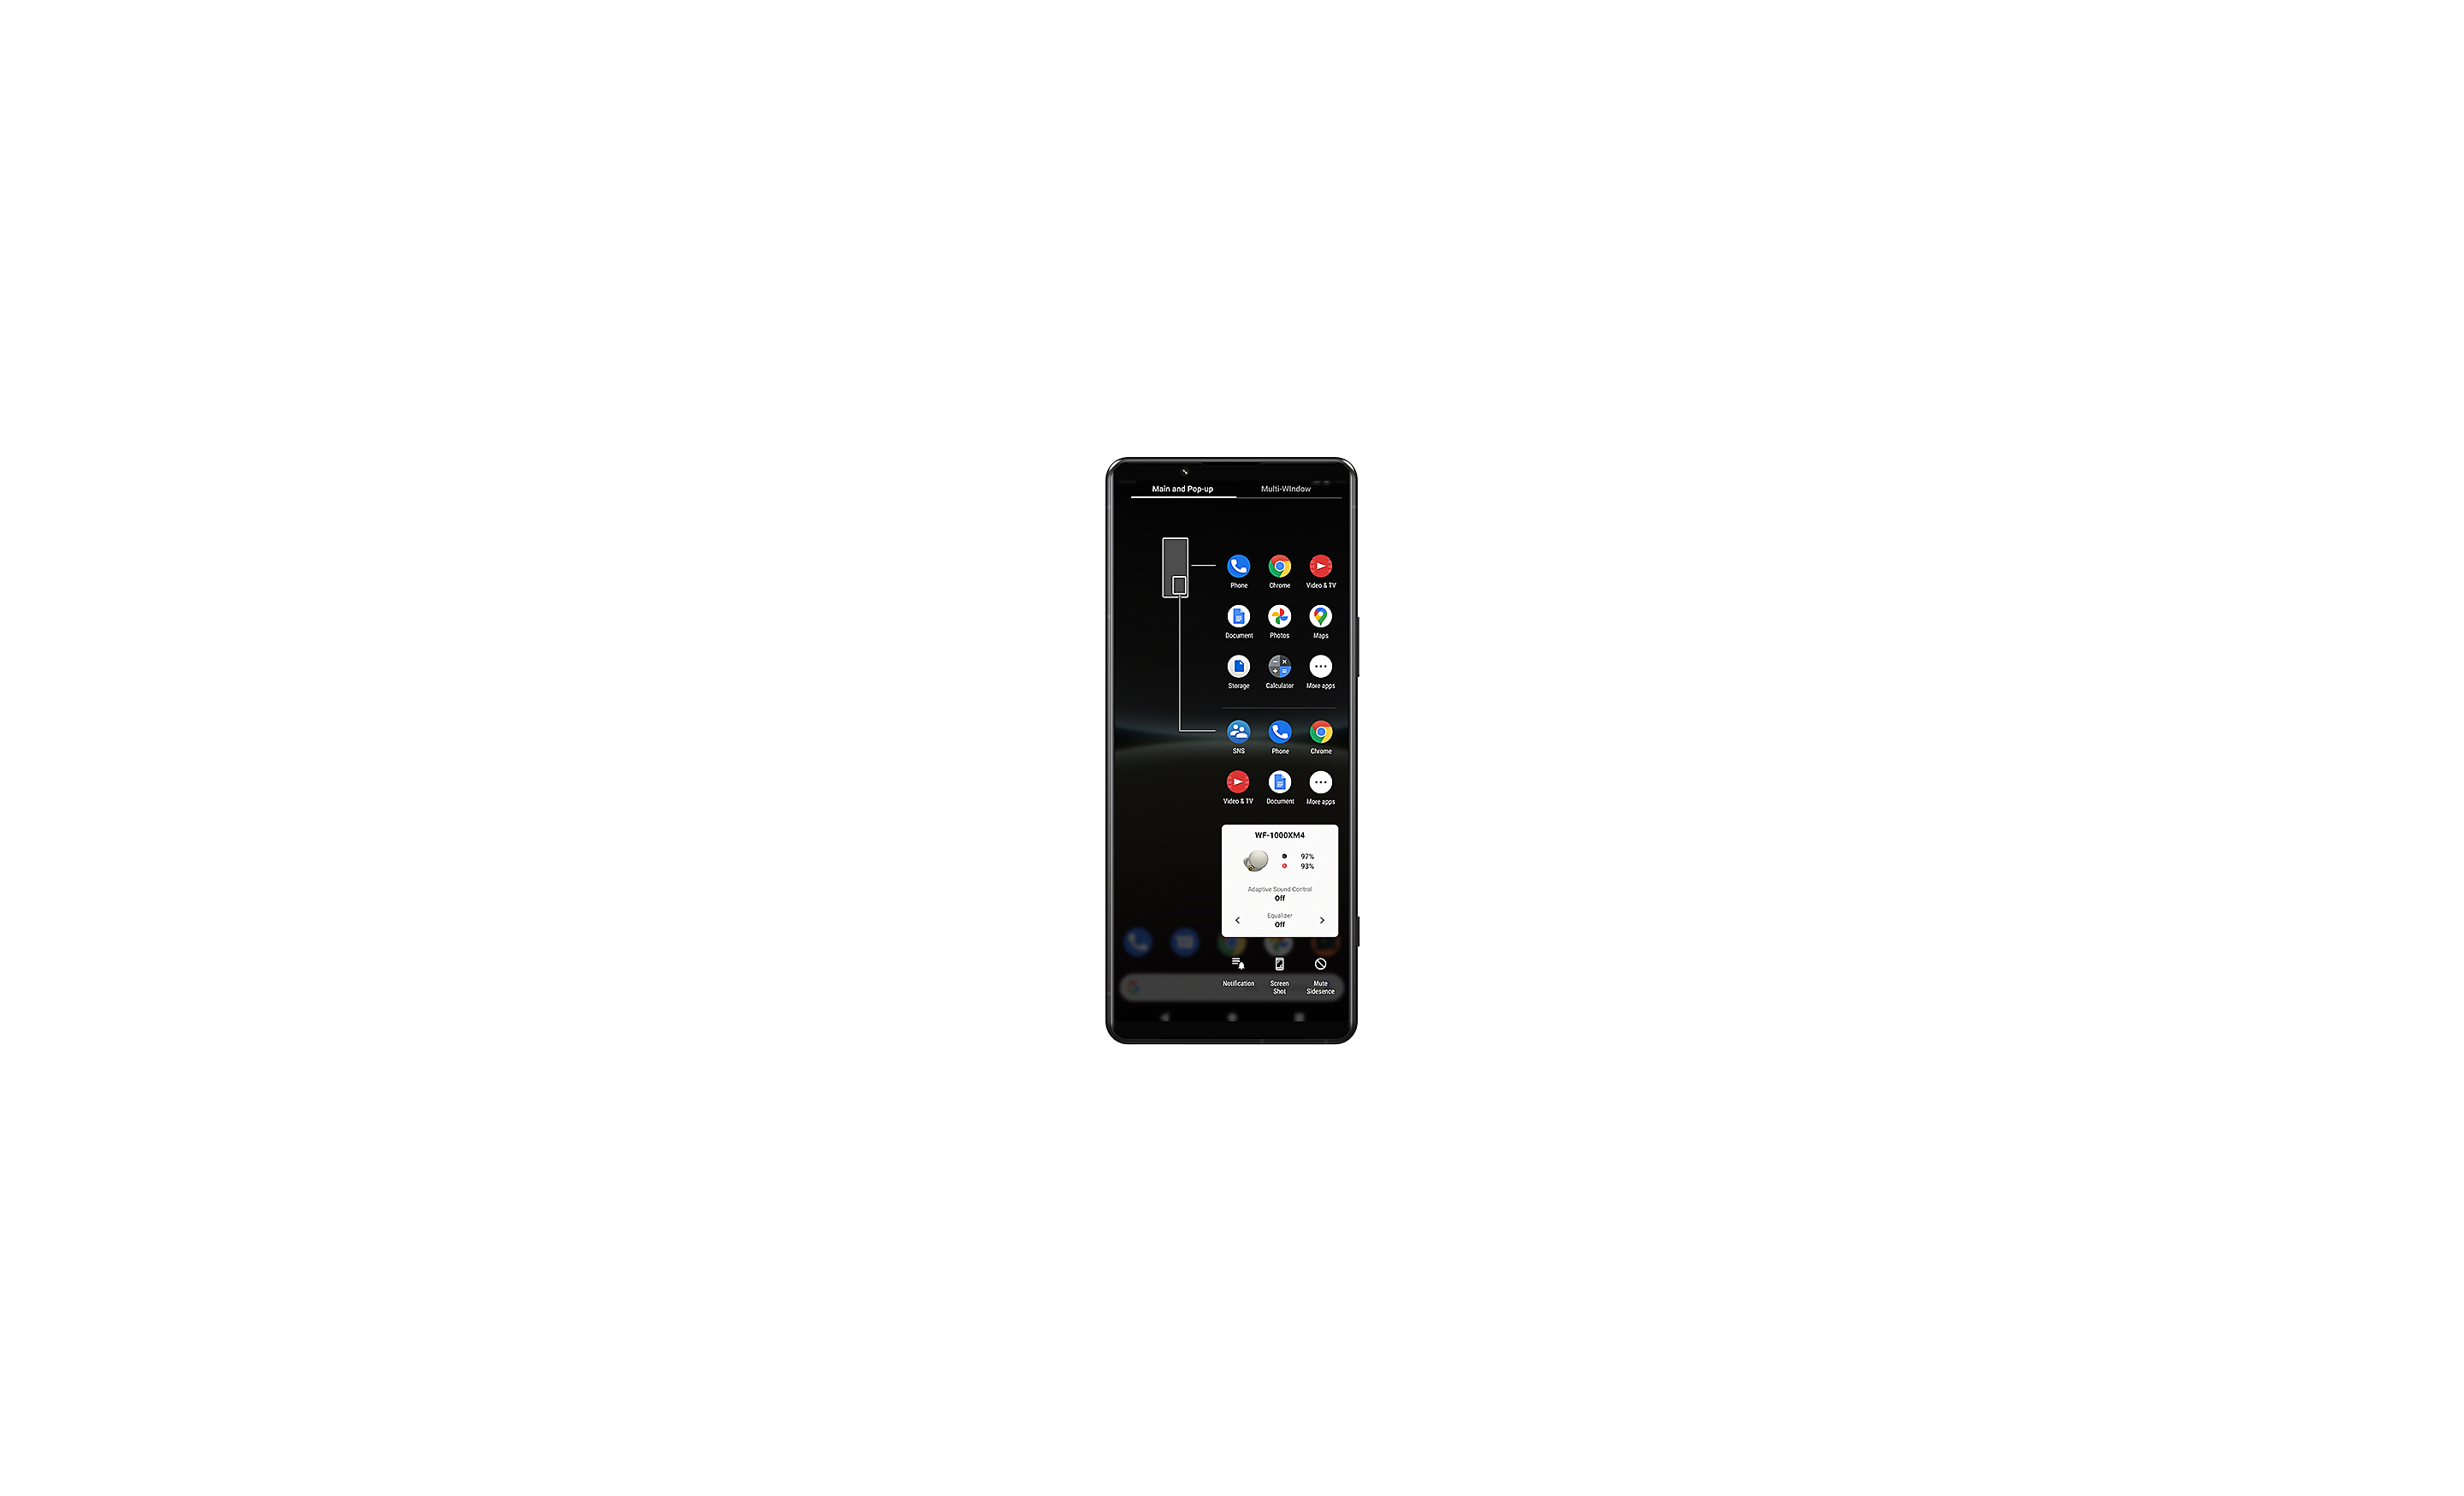 Xperia Smartphone mit angezeigter Window Manager-UI